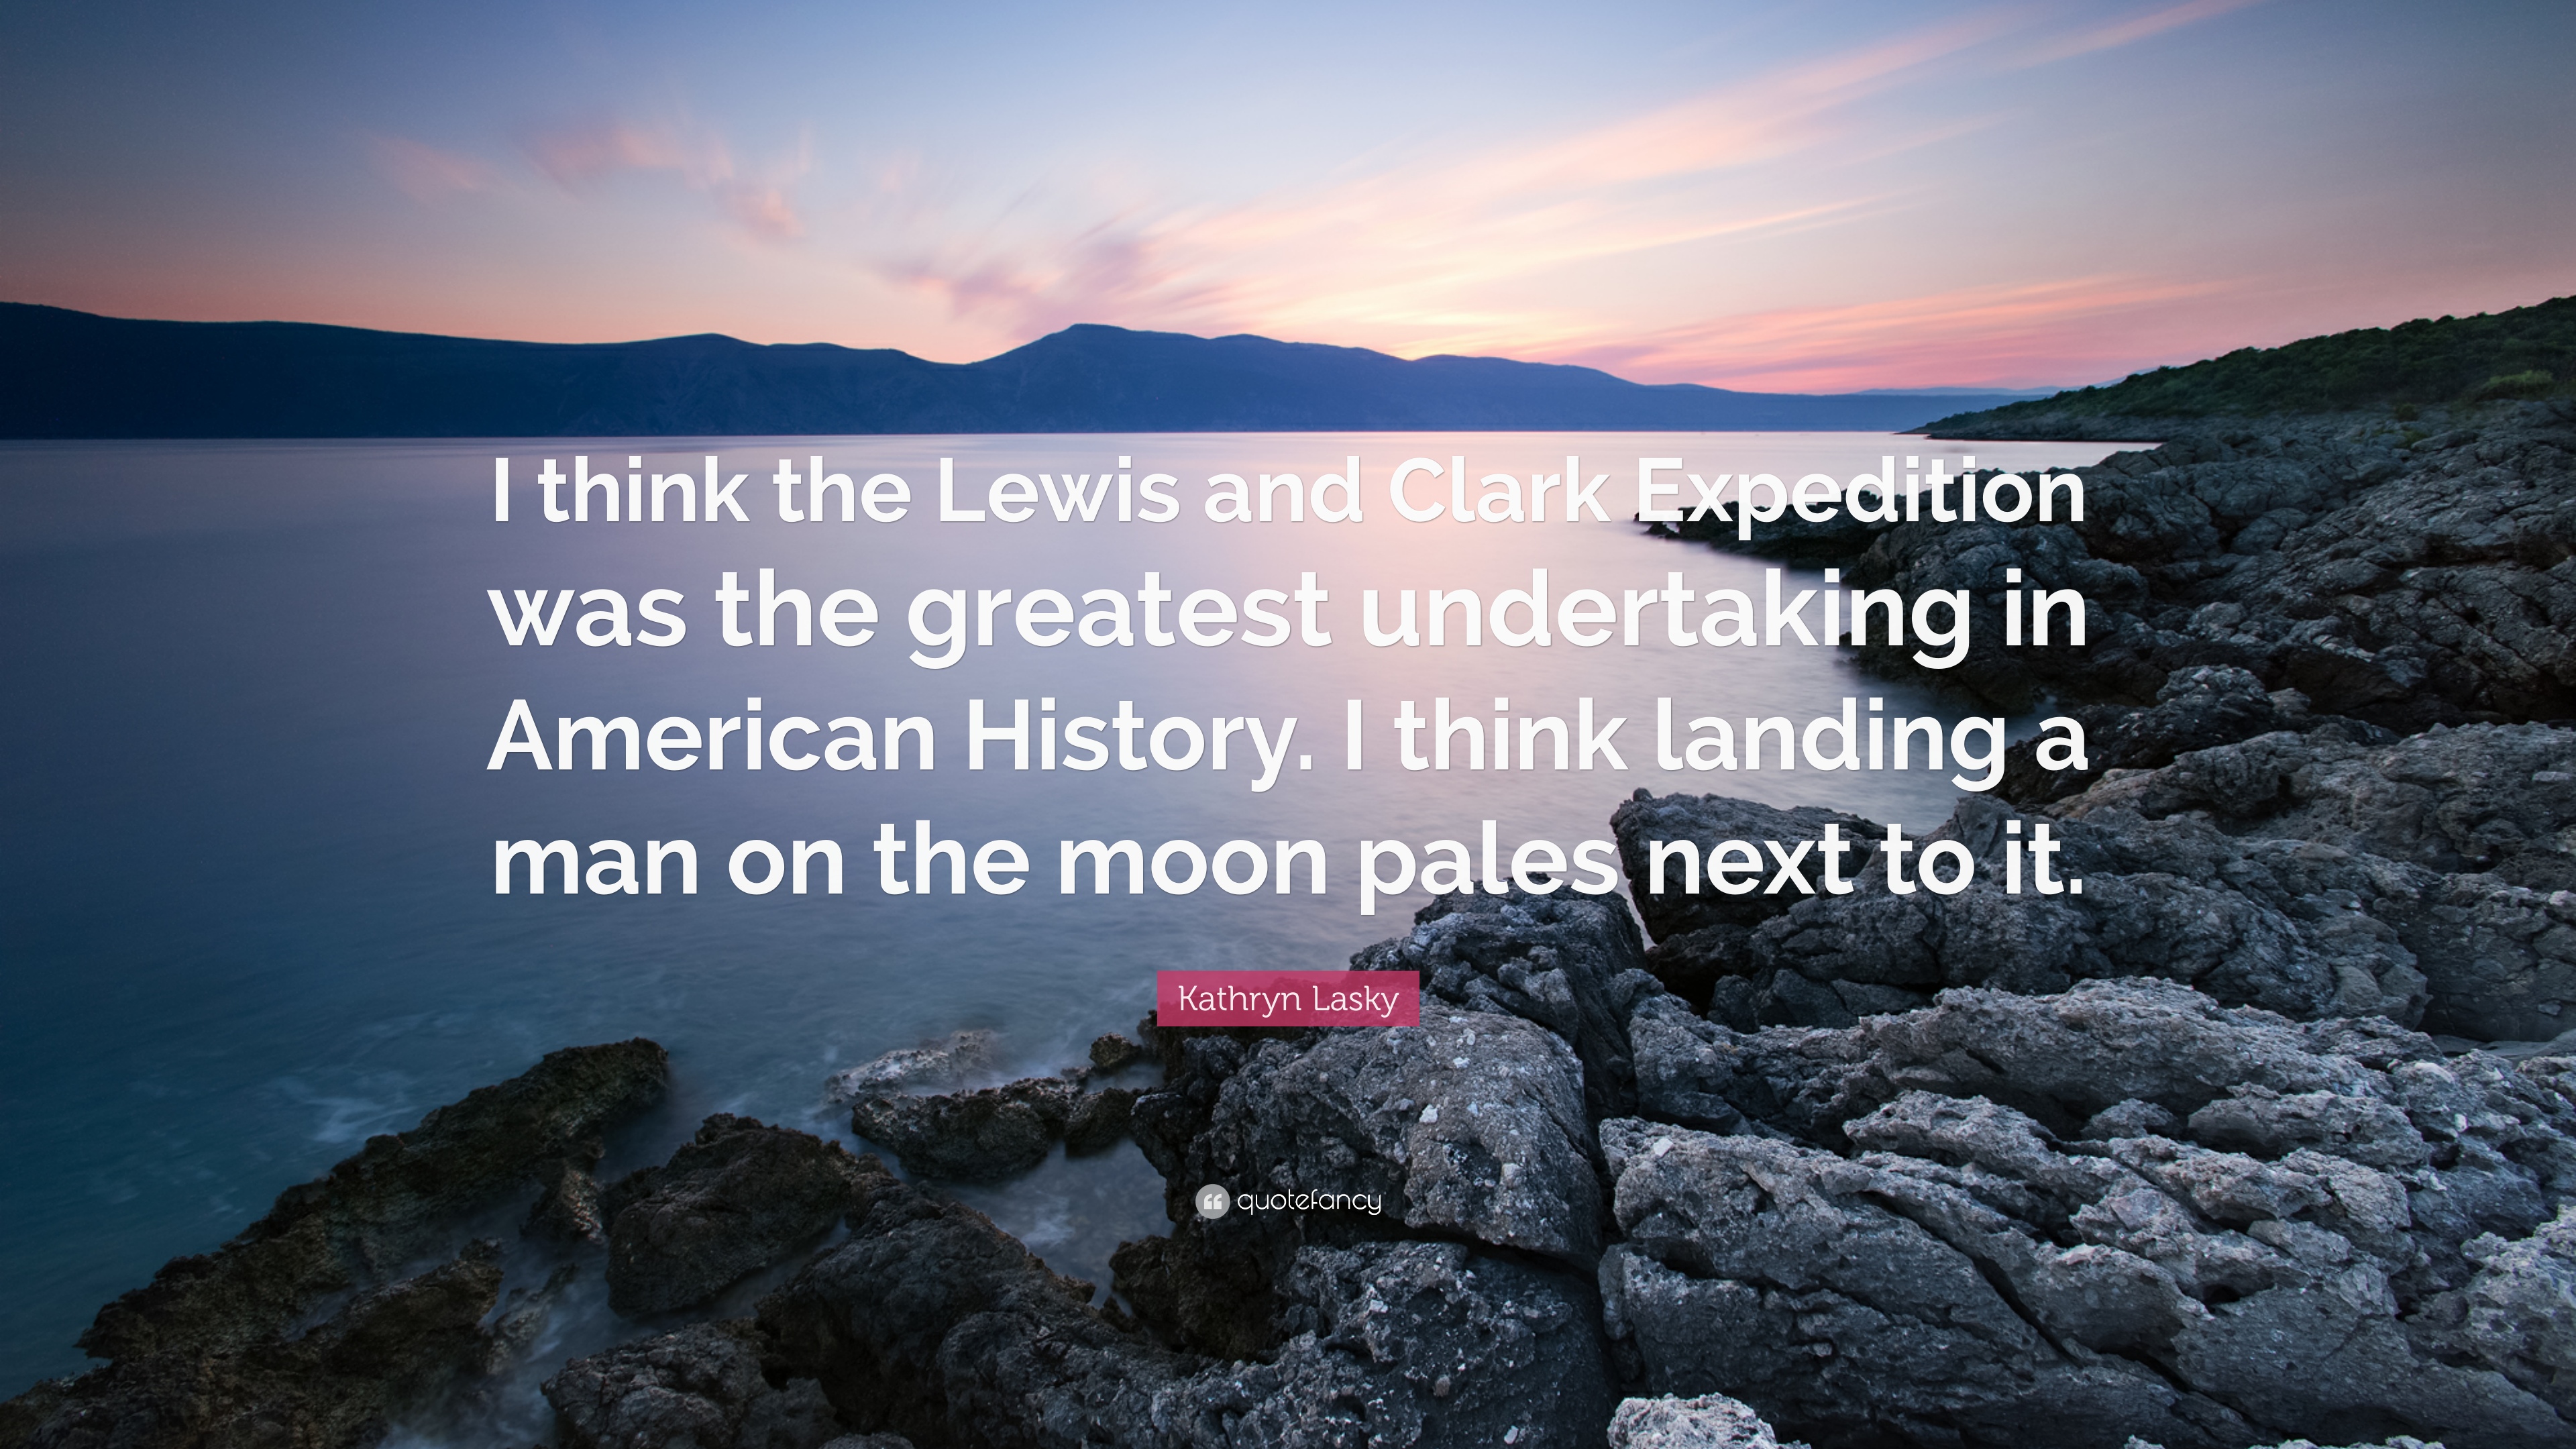 Kathryn Lasky Quote: “I think the Lewis and Clark Expedition was the greatest undertaking in American History. I think landing a man on the mo.”